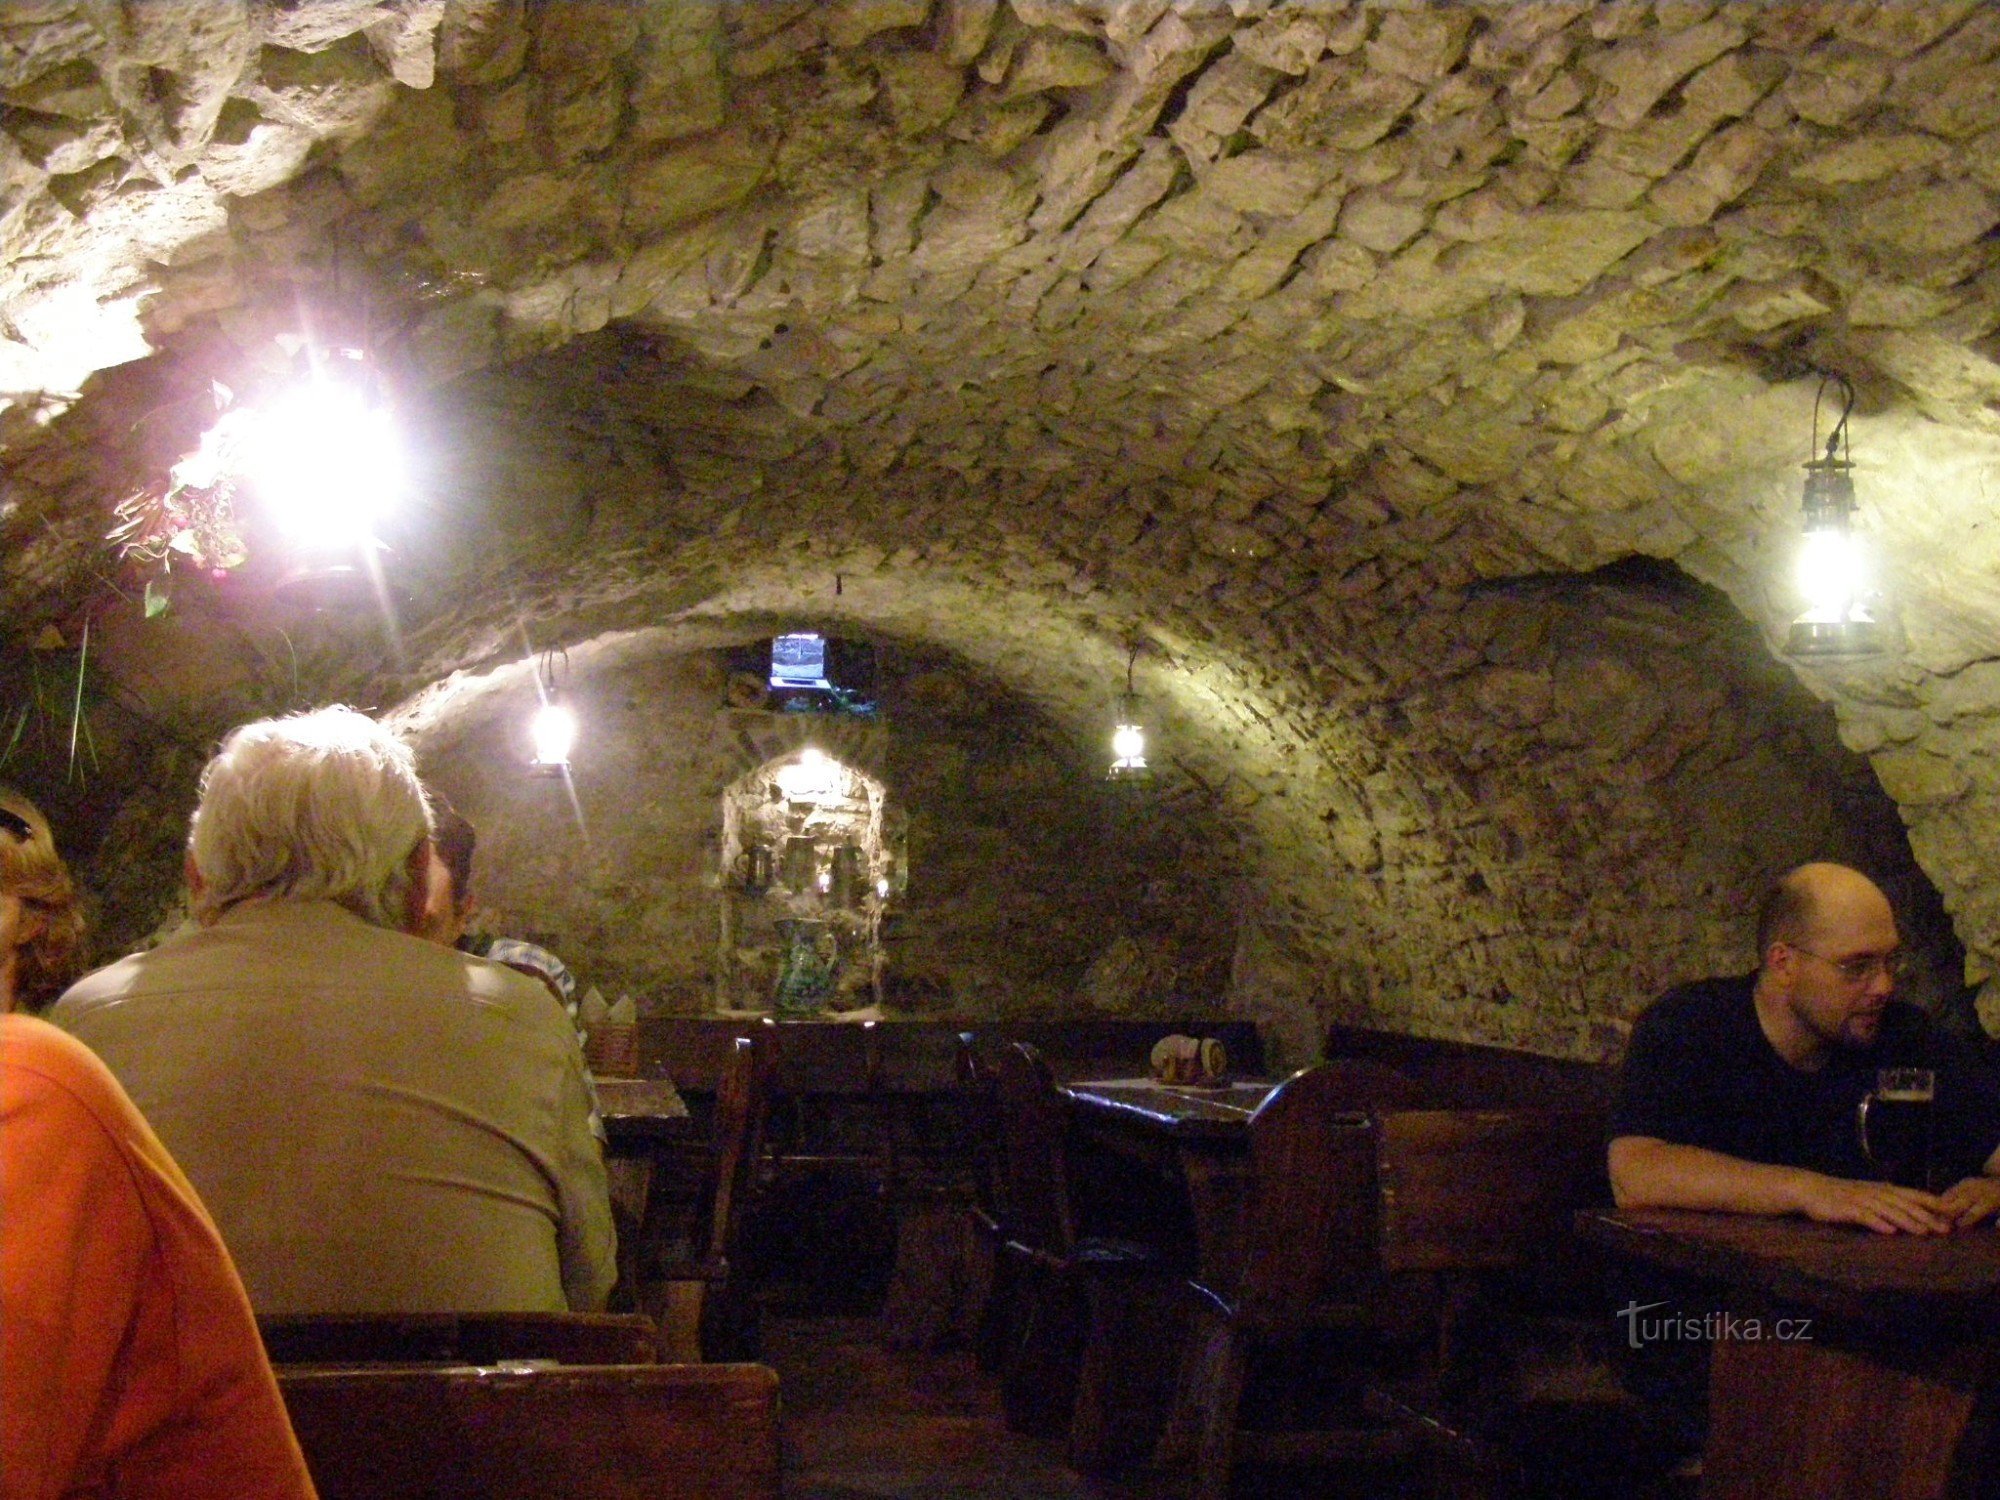 sitting in the stone pub of the local brewery